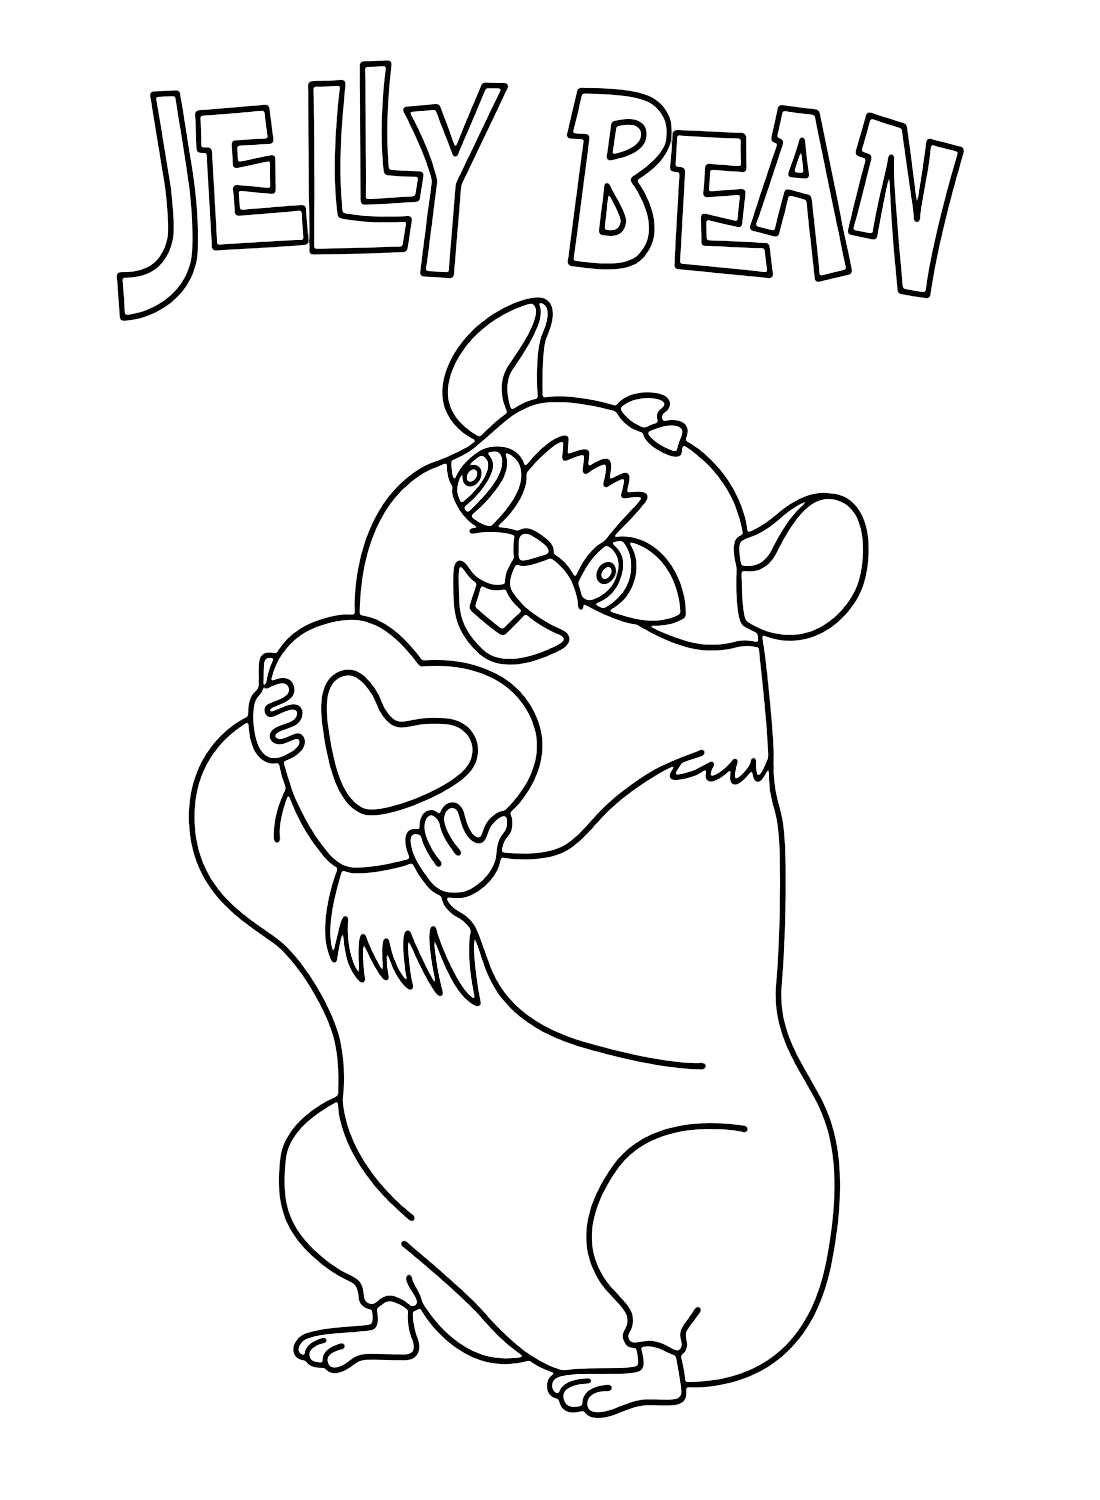 Coloring Pages Jelly Bean from Cocomelon